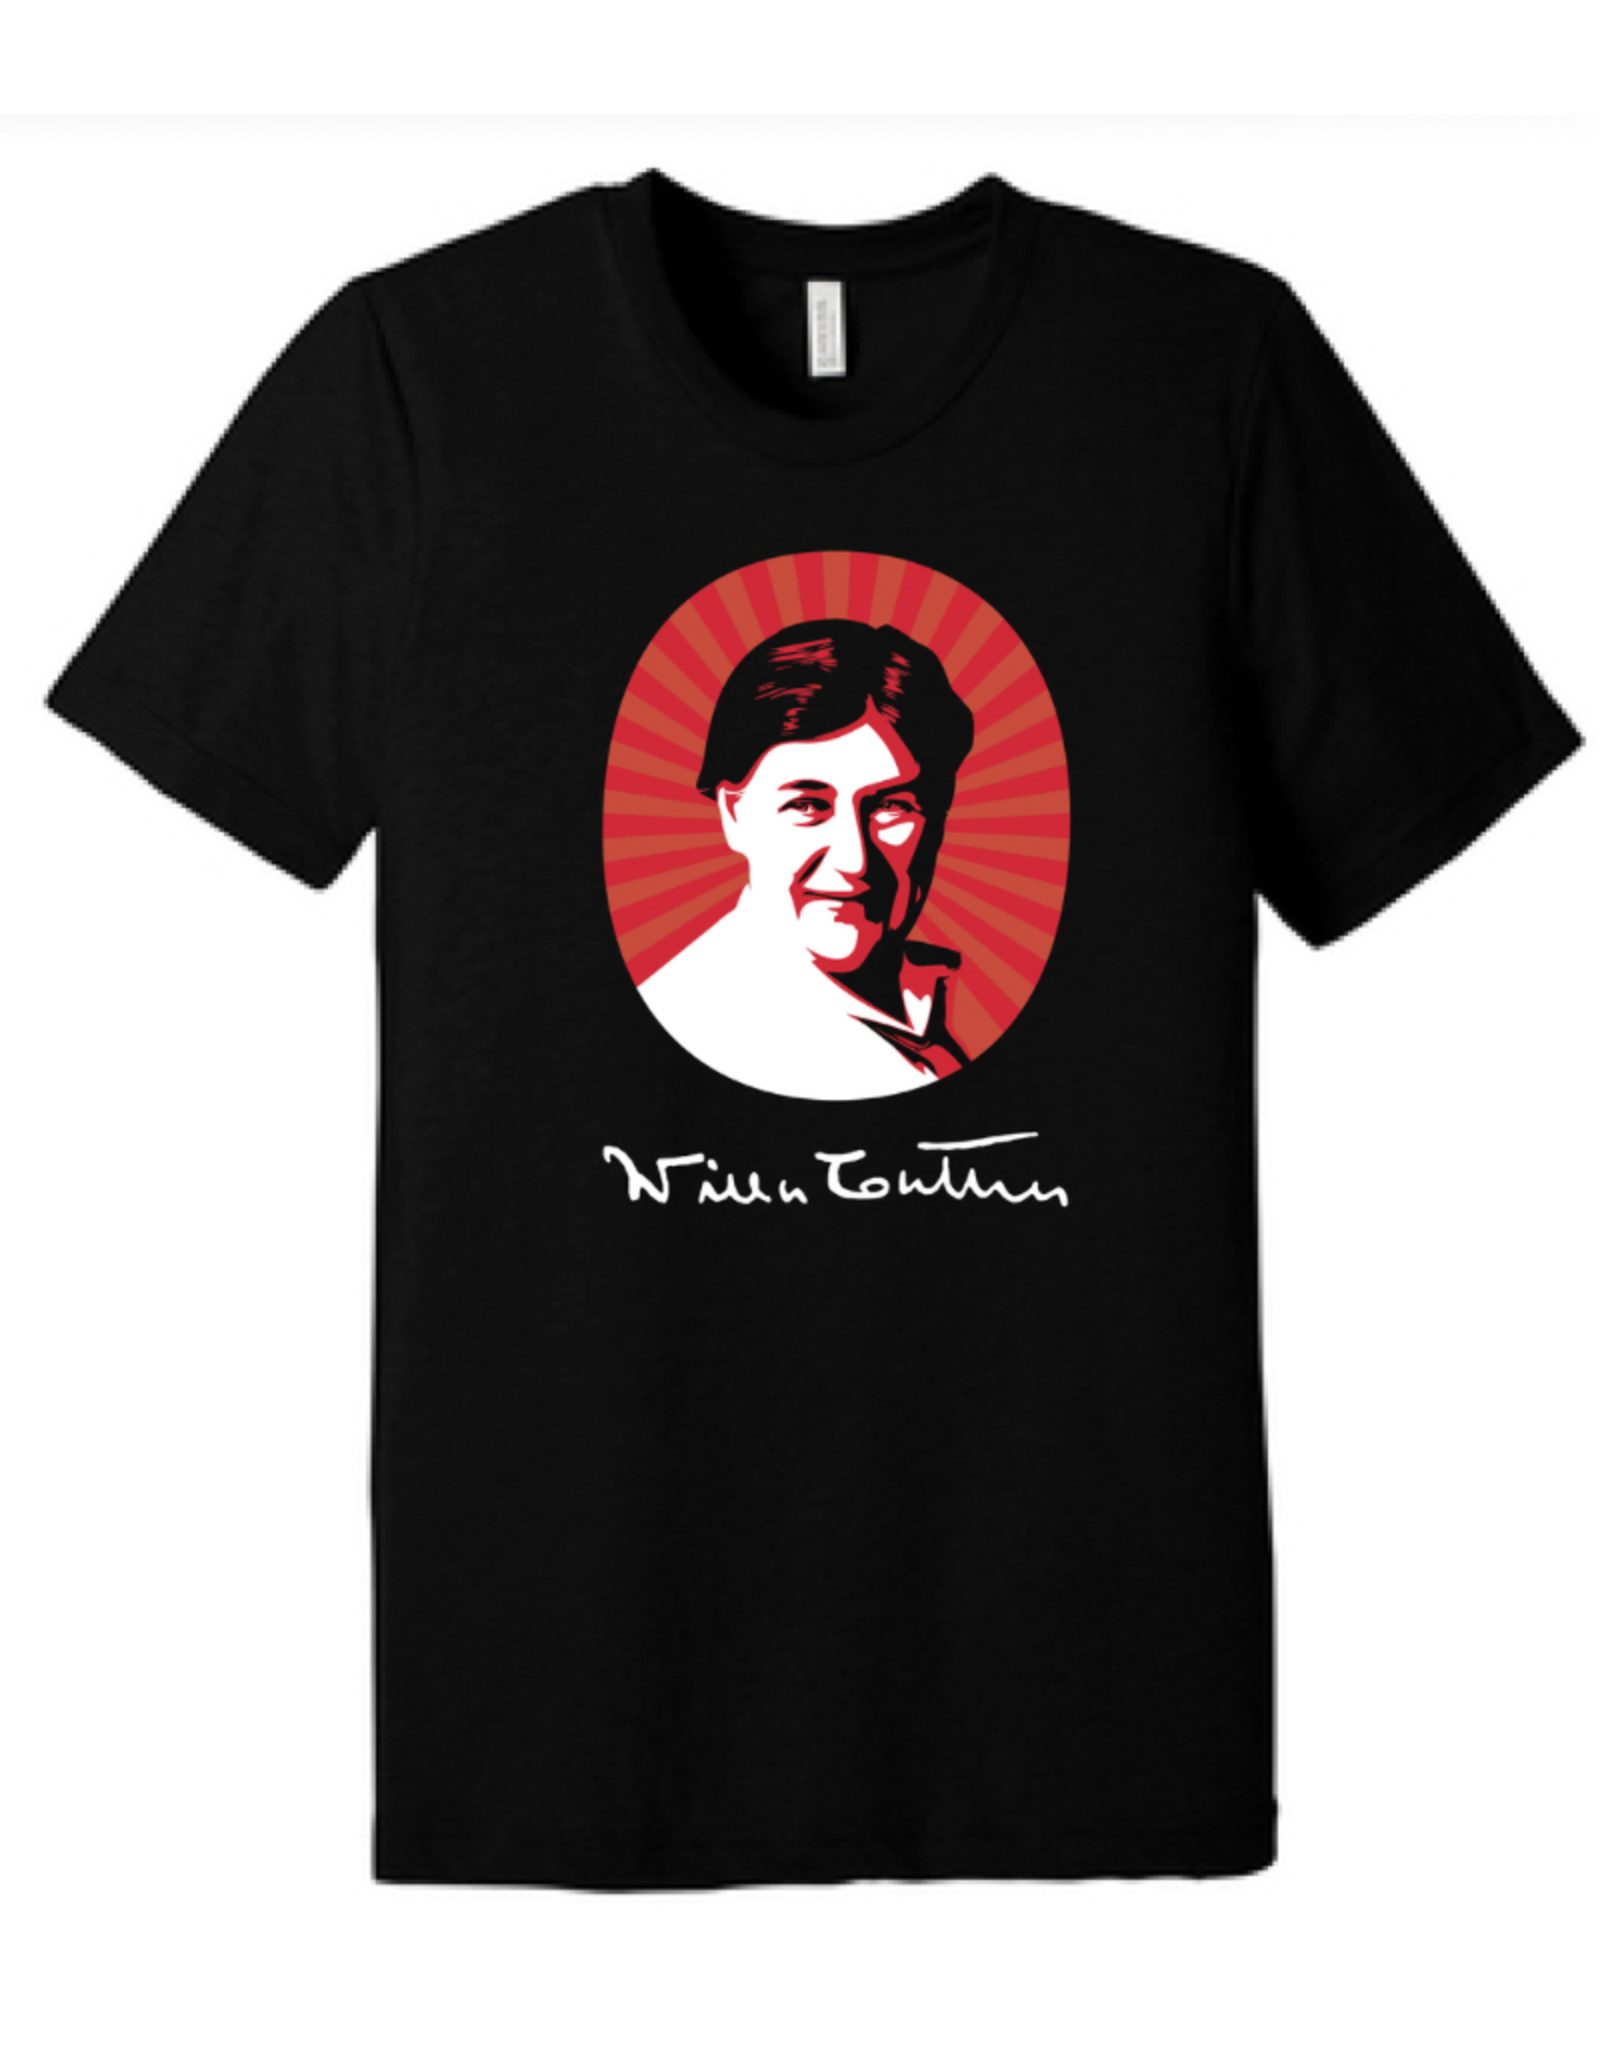 Willa Cather Portrait and Signature T-Shirt